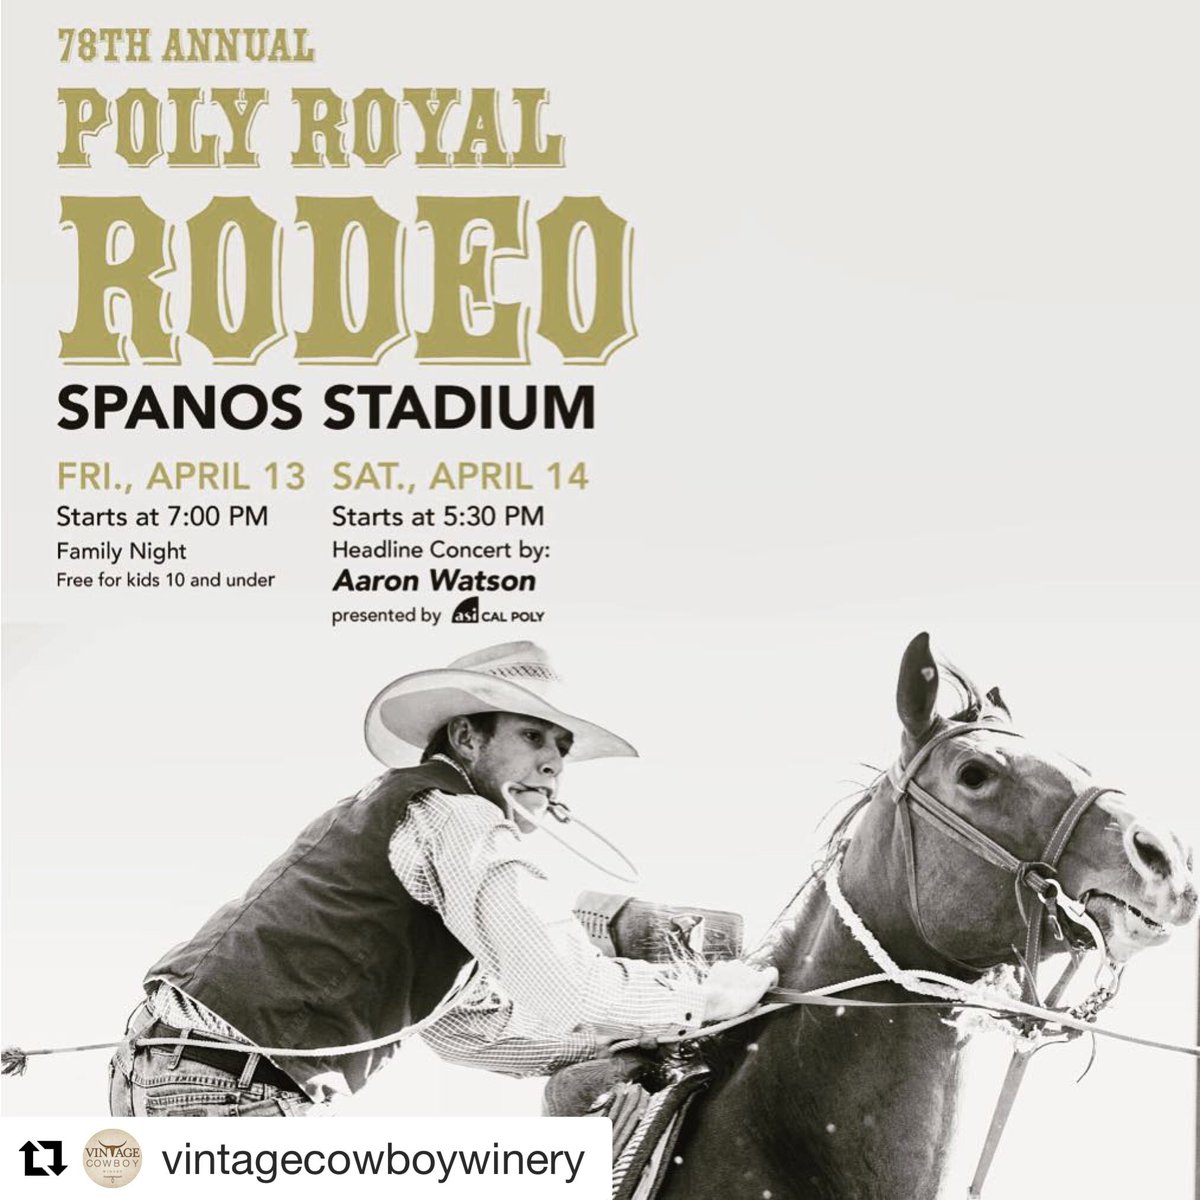 Tonight is the 1st performance of the 78th Annual Poly Royal Rodeo at 7 PM! Bring your family and come enjoy the rodeo! Get your tickets at tickets.calpoly.edu